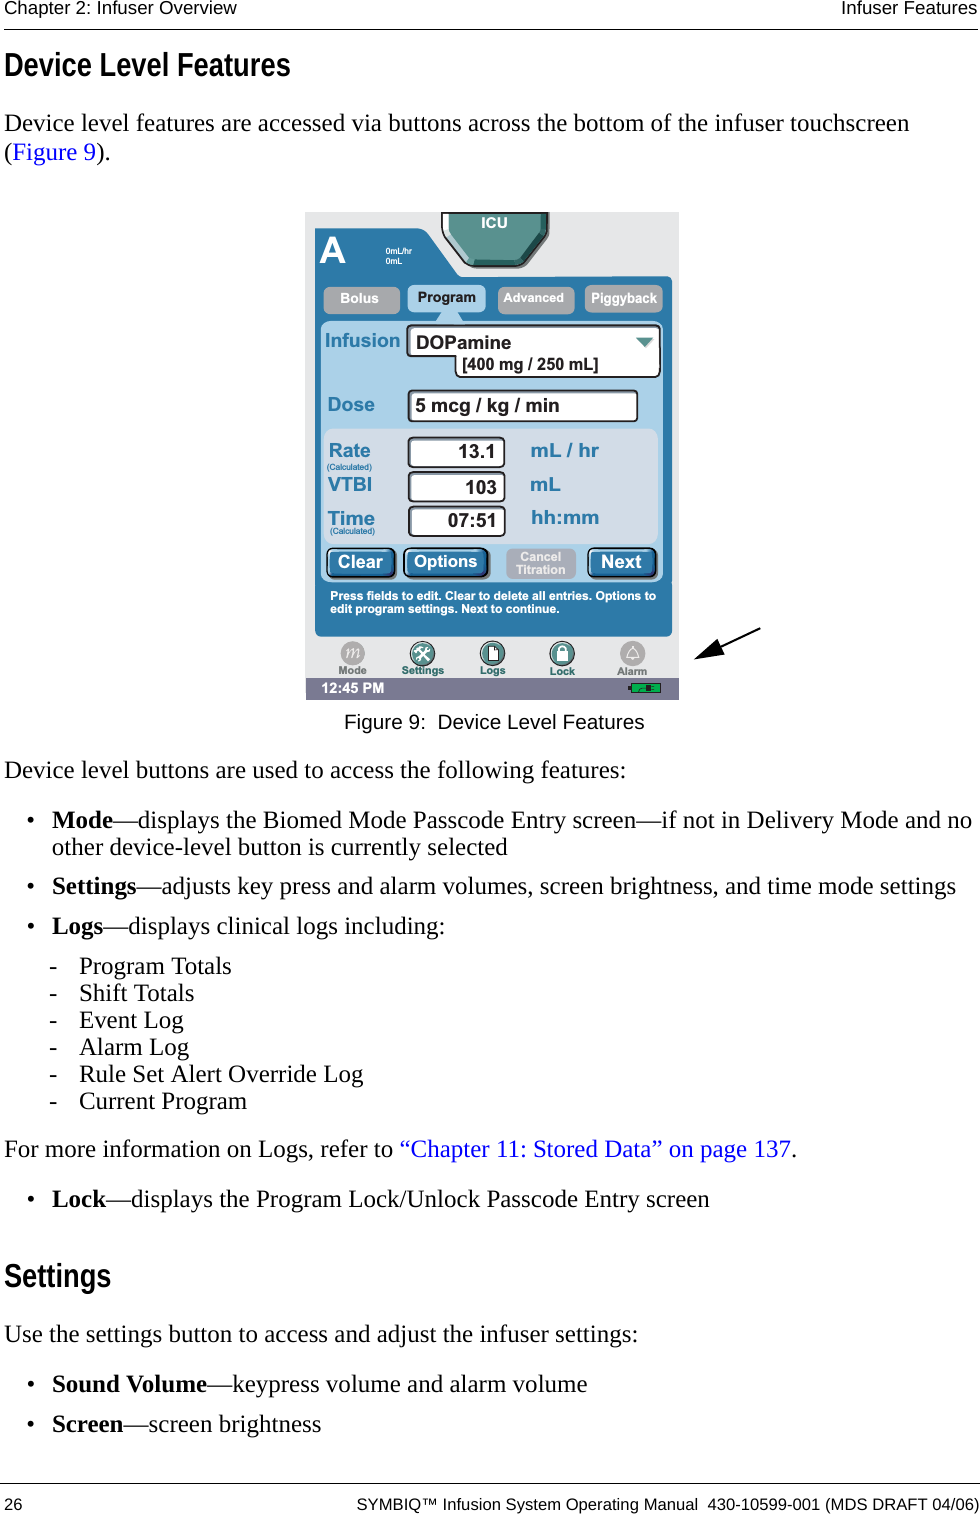  26 SYMBIQ™ Infusion System Operating Manual  430-10599-001 (MDS DRAFT 04/06)Chapter 2: Infuser Overview Infuser FeaturesDevice Level FeaturesDevice level features are accessed via buttons across the bottom of the infuser touchscreen (Figure 9). Figure 9:  Device Level FeaturesDevice level buttons are used to access the following features:•Mode—displays the Biomed Mode Passcode Entry screen—if not in Delivery Mode and no other device-level button is currently selected•Settings—adjusts key press and alarm volumes, screen brightness, and time mode settings•Logs—displays clinical logs including:- Program Totals- Shift Totals- Event Log-Alarm Log- Rule Set Alert Override Log- Current ProgramFor more information on Logs, refer to “Chapter 11: Stored Data” on page 137.•Lock—displays the Program Lock/Unlock Passcode Entry screenSettingsUse the settings button to access and adjust the infuser settings:•Sound Volume—keypress volume and alarm volume•Screen—screen brightness12:45 PMAProgramPiggybackRateDoseInfusion5mcg/kg/min13.110307:51VTBITimemL / hrmLhh:mmDOPaminePress fields to edit. Clear to delete all entries. Options toedit program settings. Next to continue.BolusAdvancedICUNextOptionsClearSettings Logs LockModeCancelTitrationAlarm0mL/hr0mL(Calculated)(Calculated)[400 mg / 250 mL]